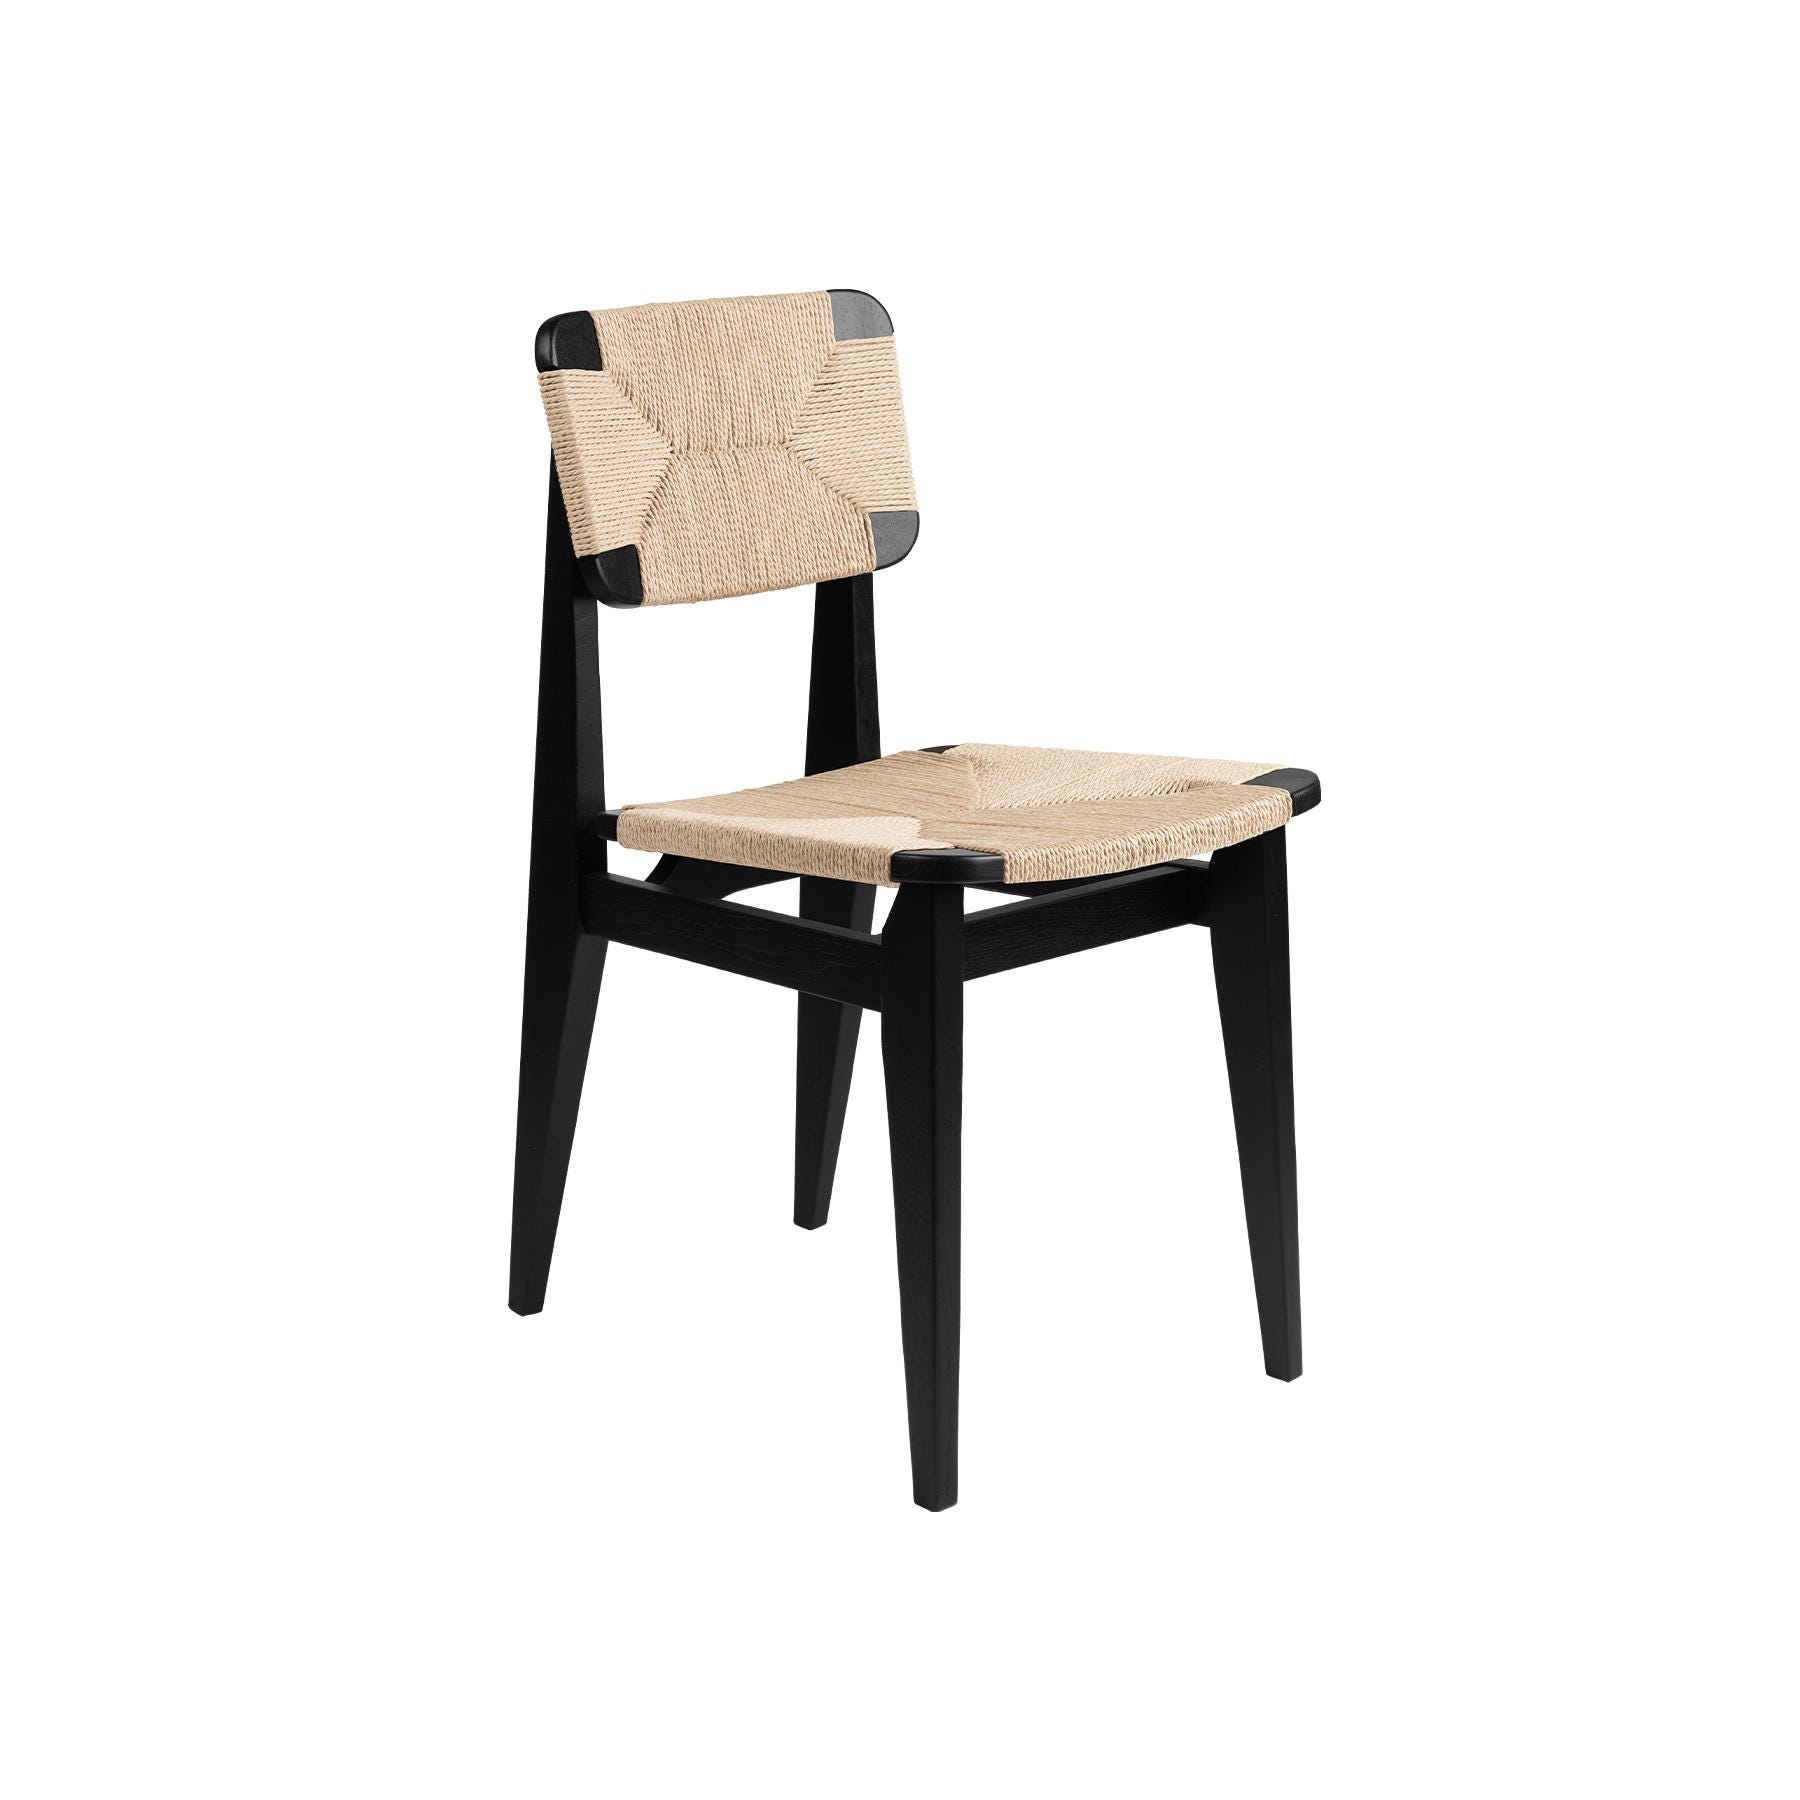 Gubi Cchair Dining Chair Paper Cord Black Stained Oak Designer Furniture From Holloways Of Ludlow